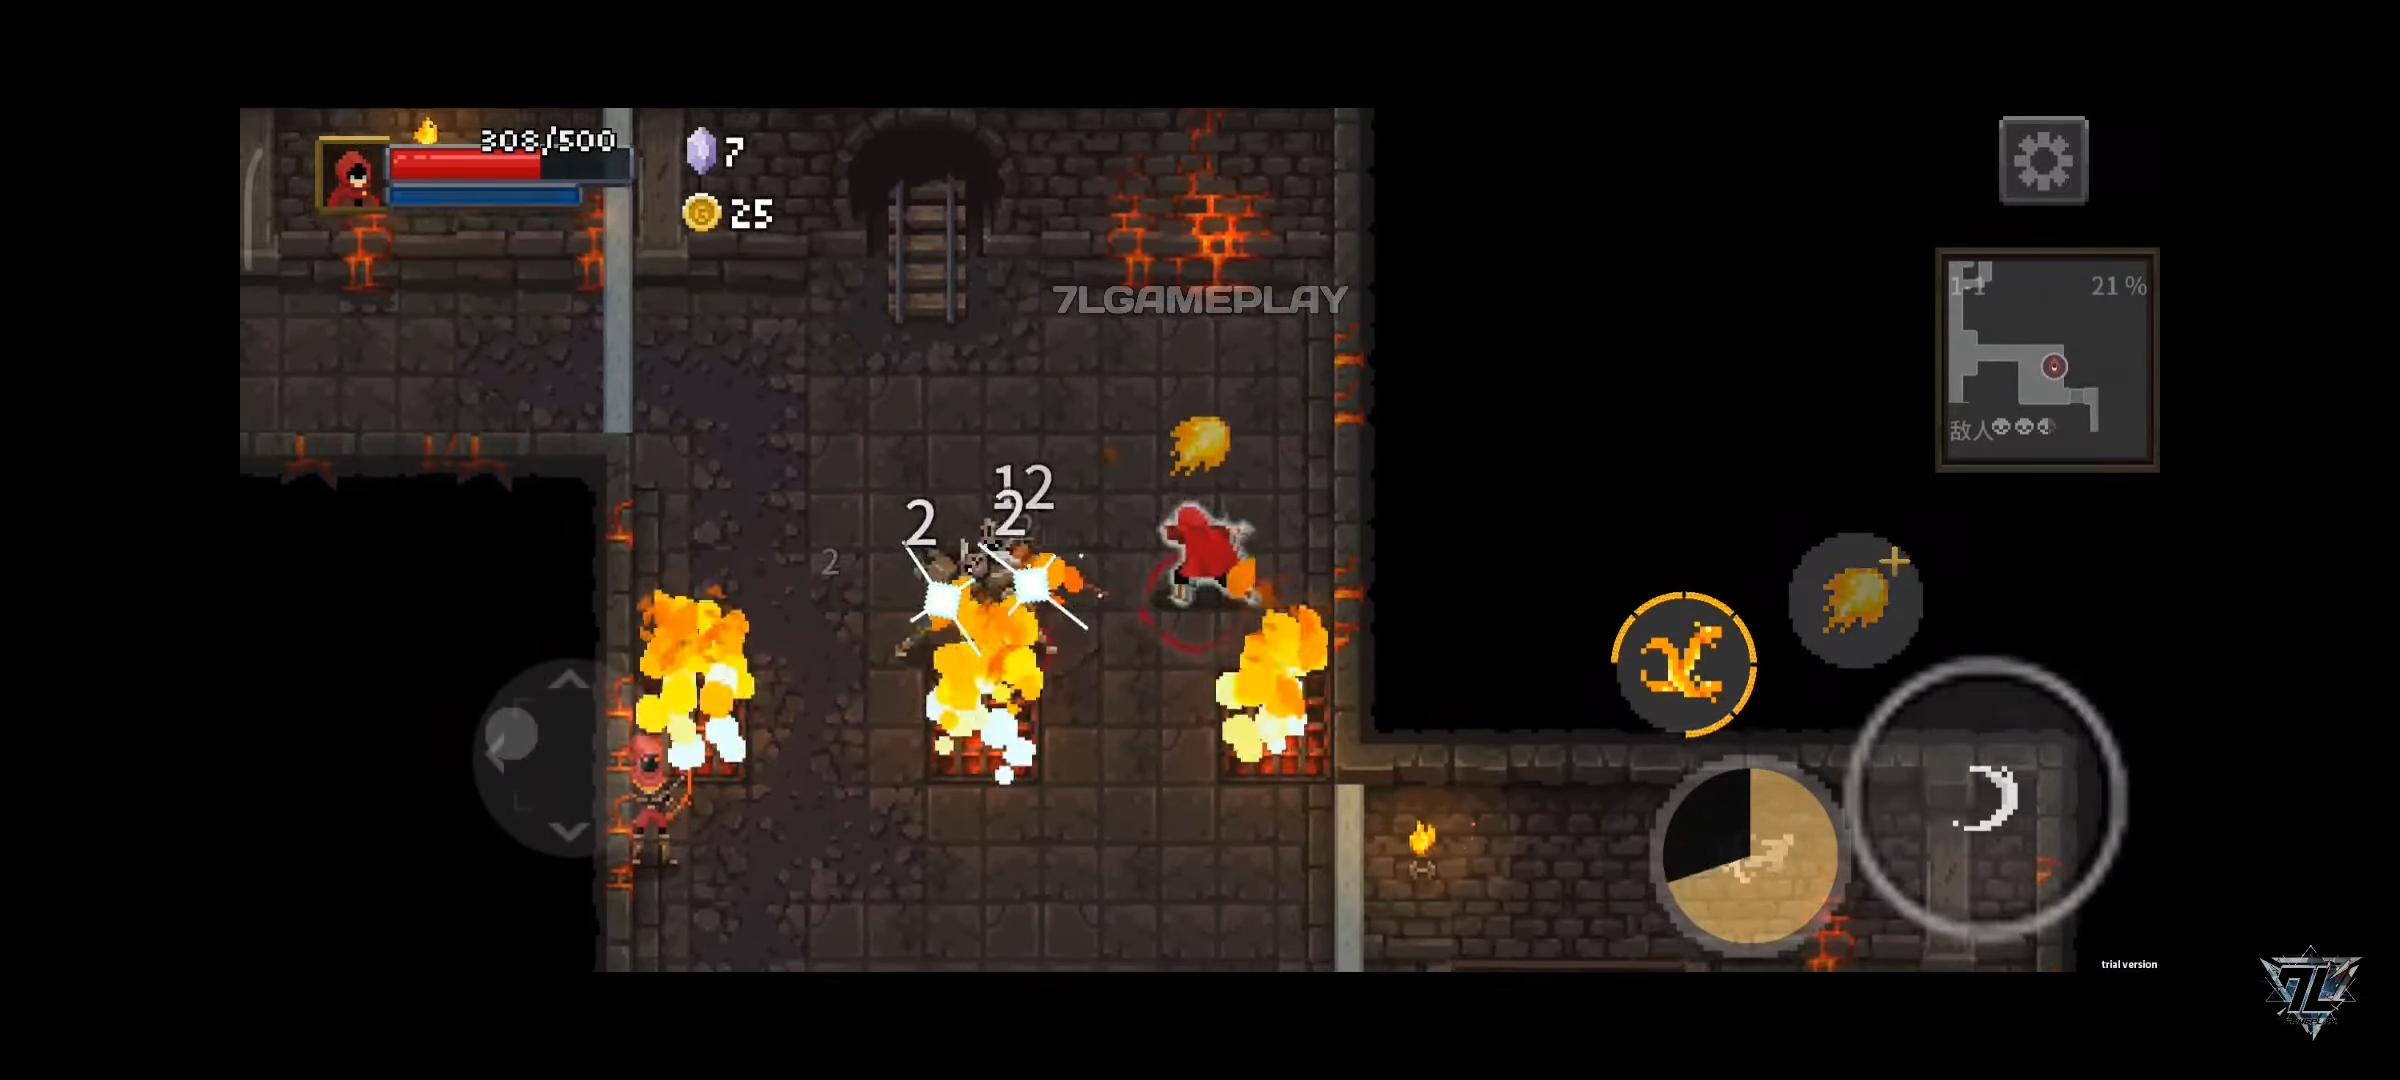 One of our favorite spell combos in Wizard of Legend! image - Indie DB